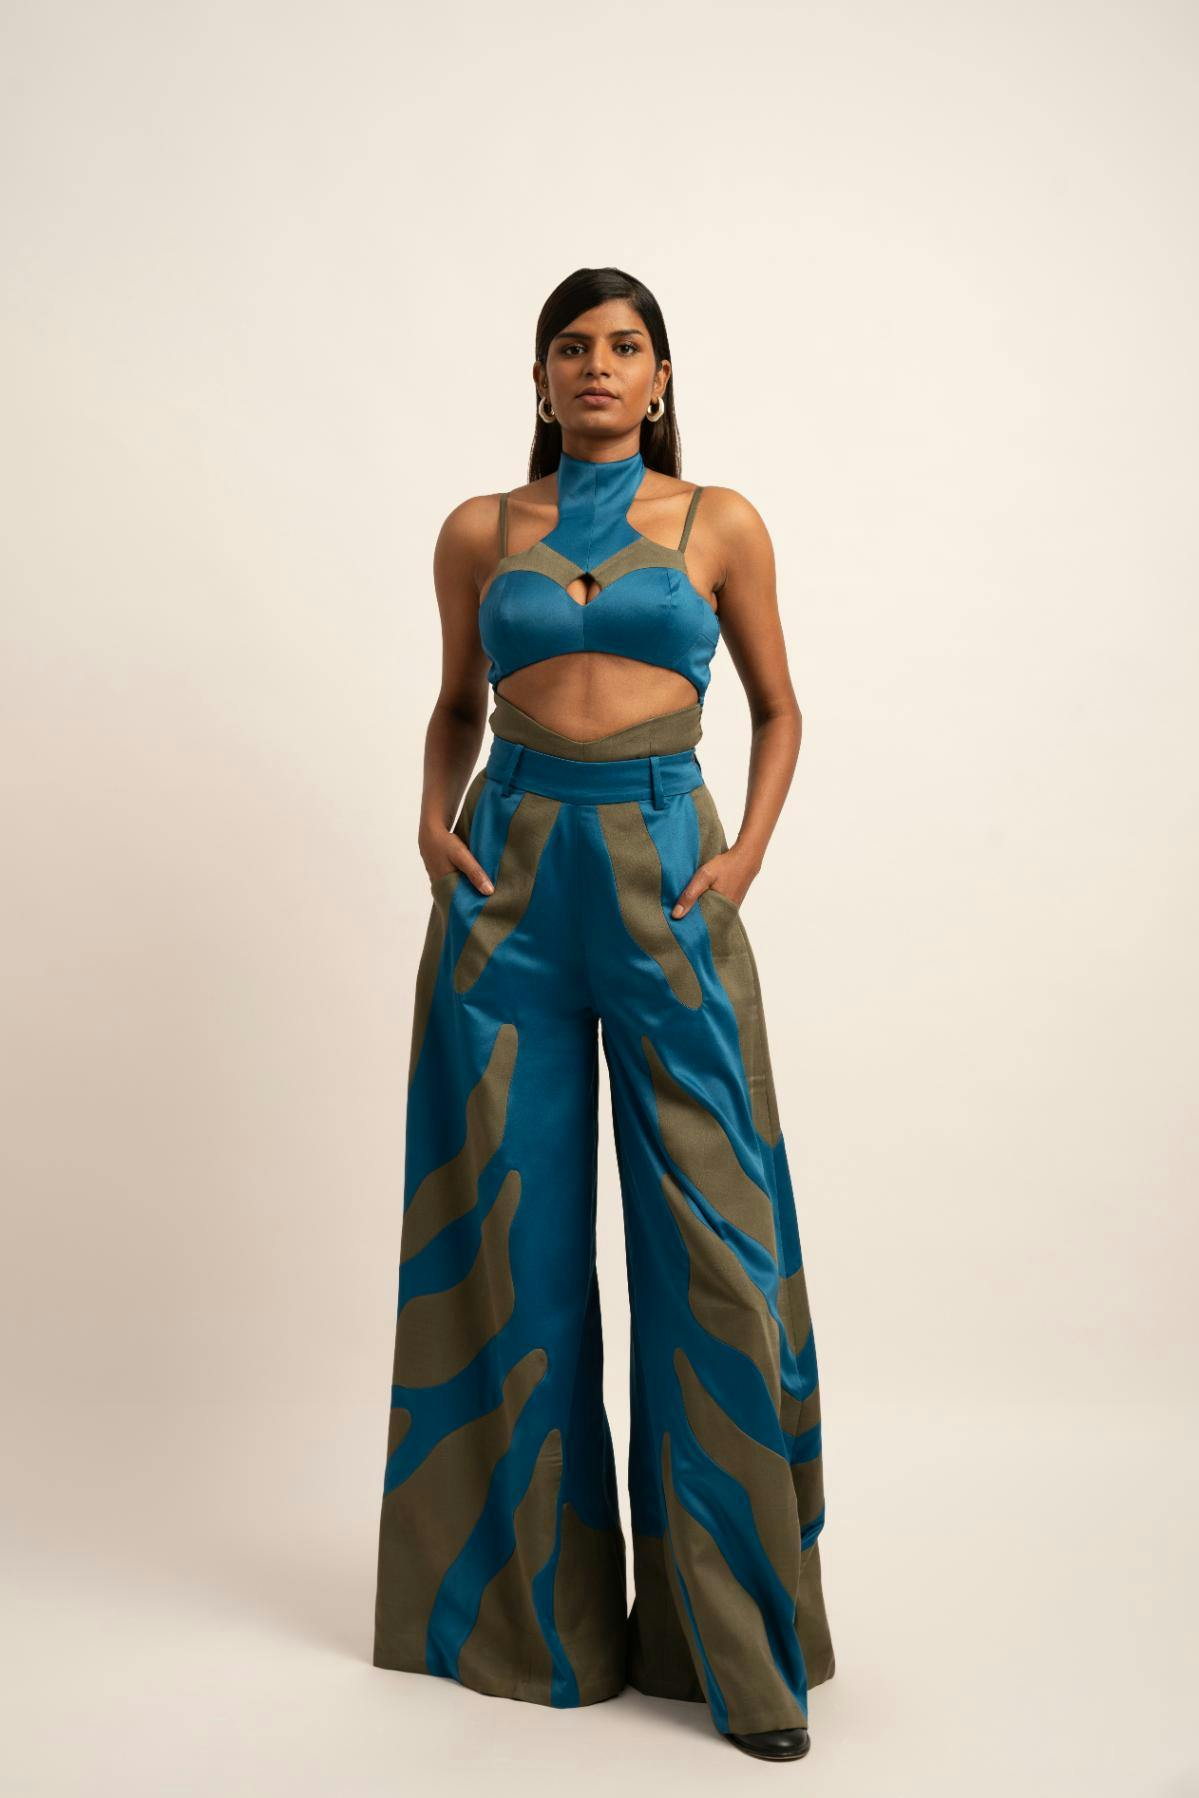 The Serene Chaos Trousers, a product by Siddhant Agrawal Label